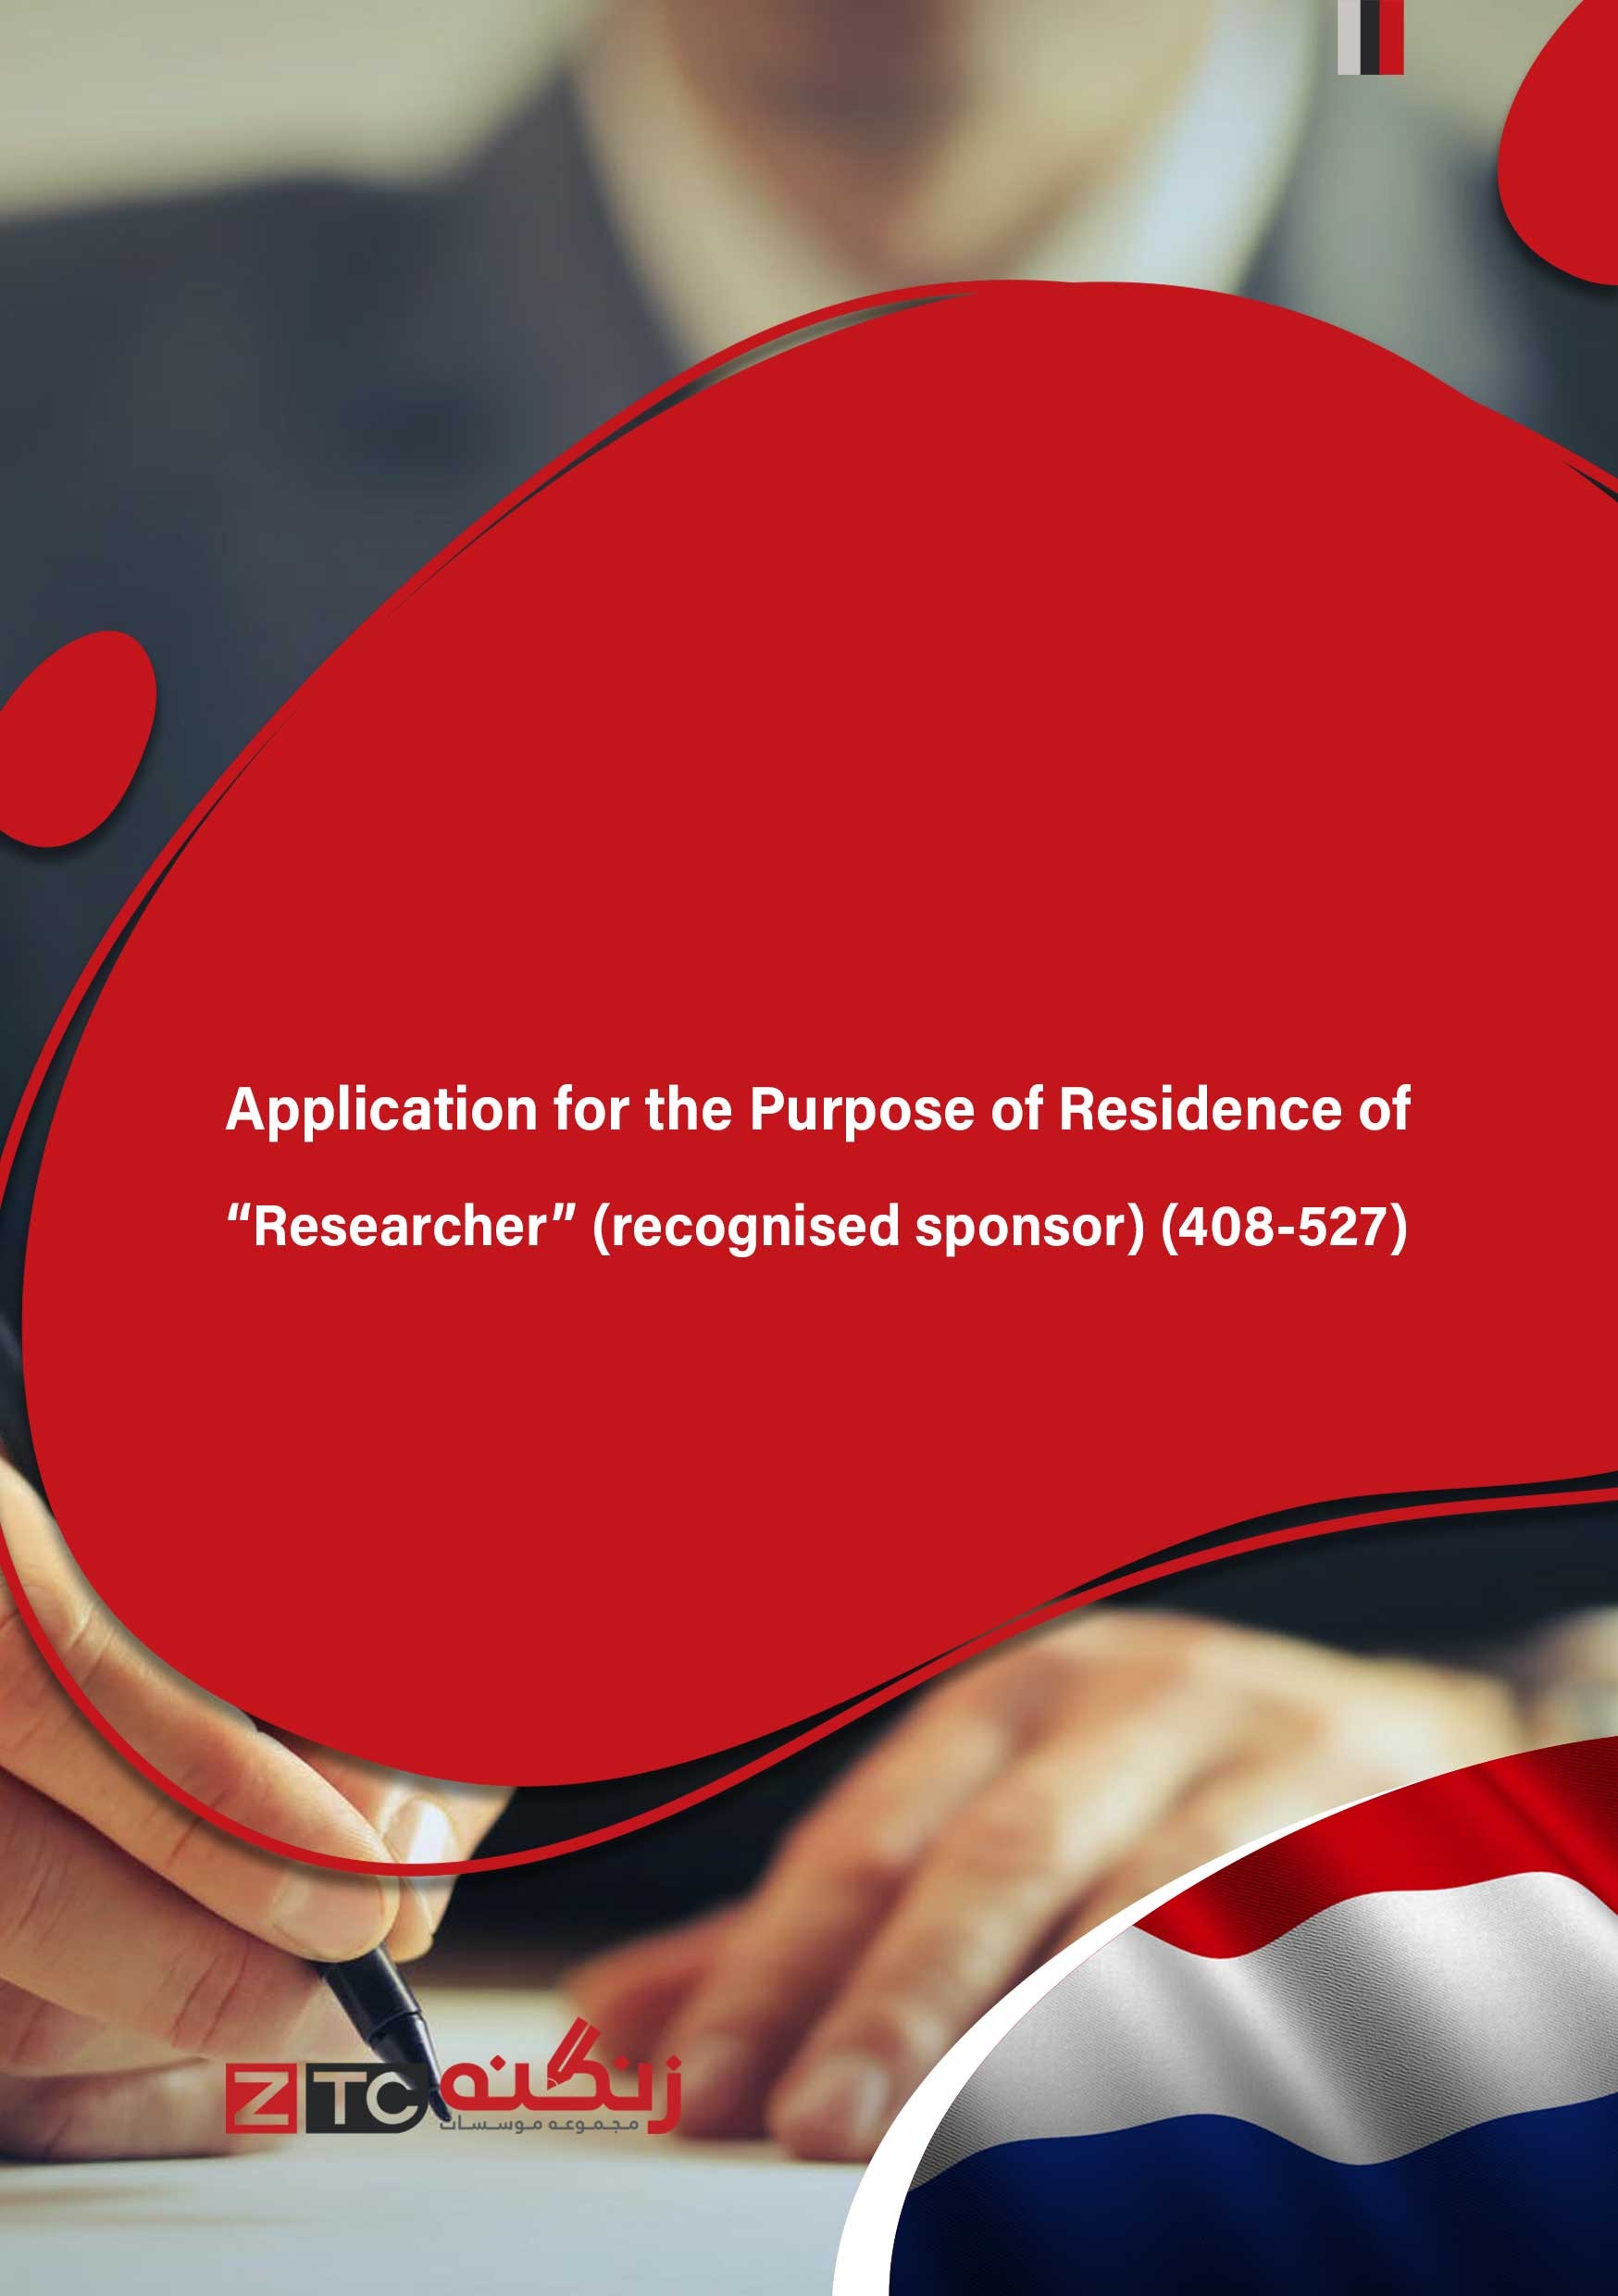 Application for the Purpose of Residence of “Researcher” (recognised sponsor) (408-527)